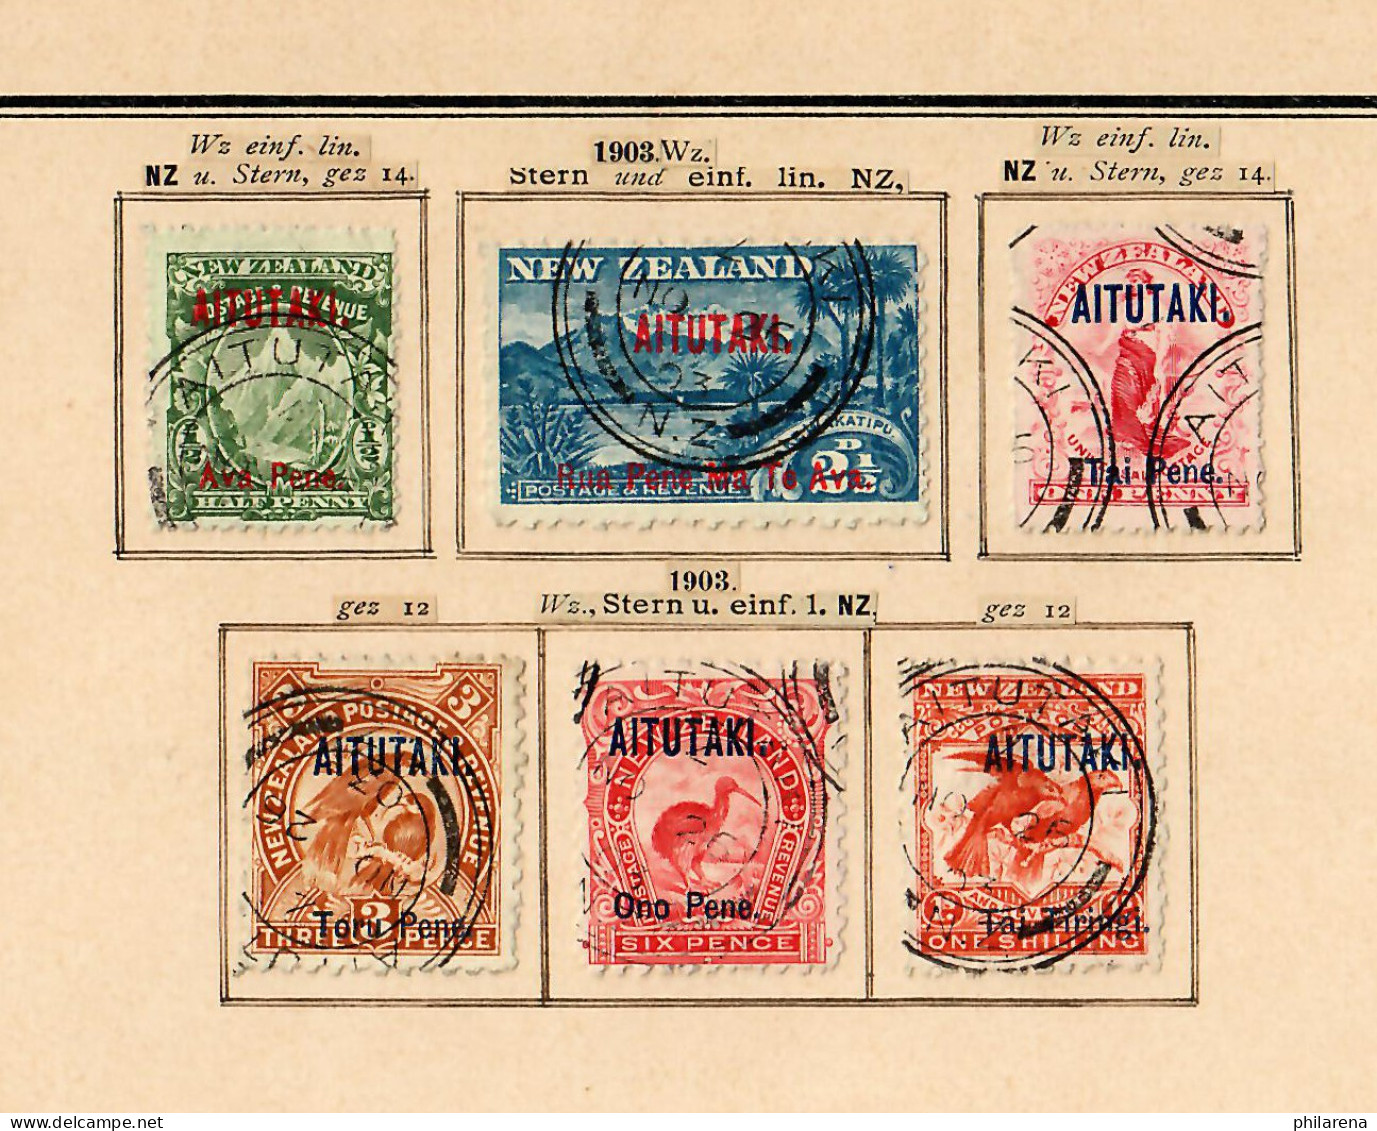 Aitutaki: First Stamps 1-6 Complete Cancelled - Cook